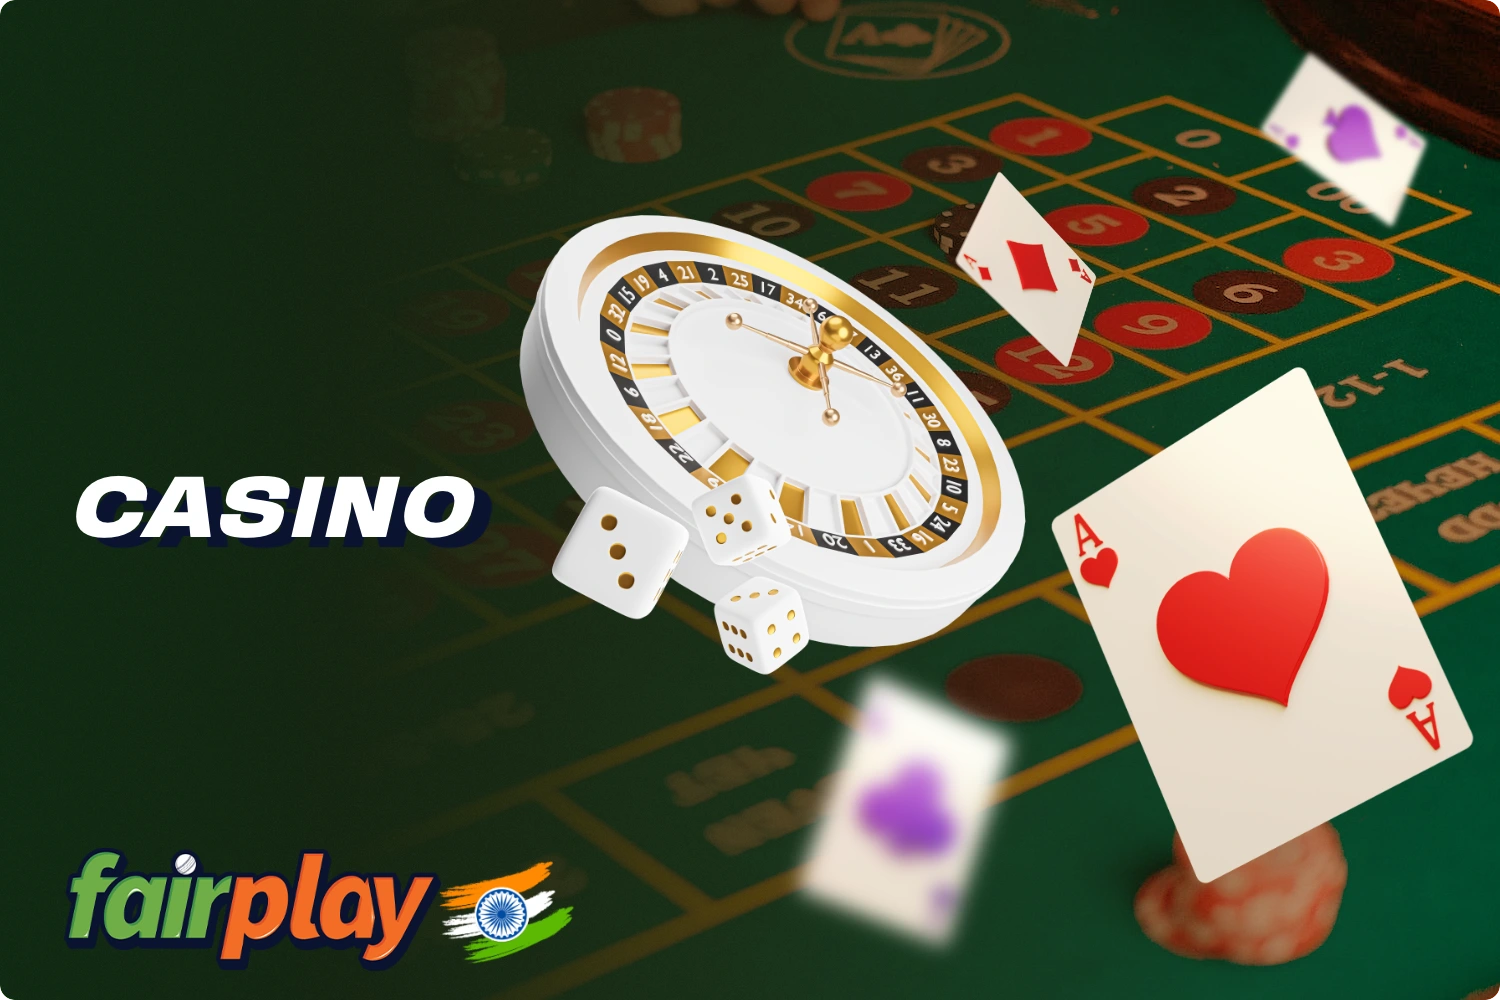 Fairplay online casino offers hundreds of popular games to its Indian users